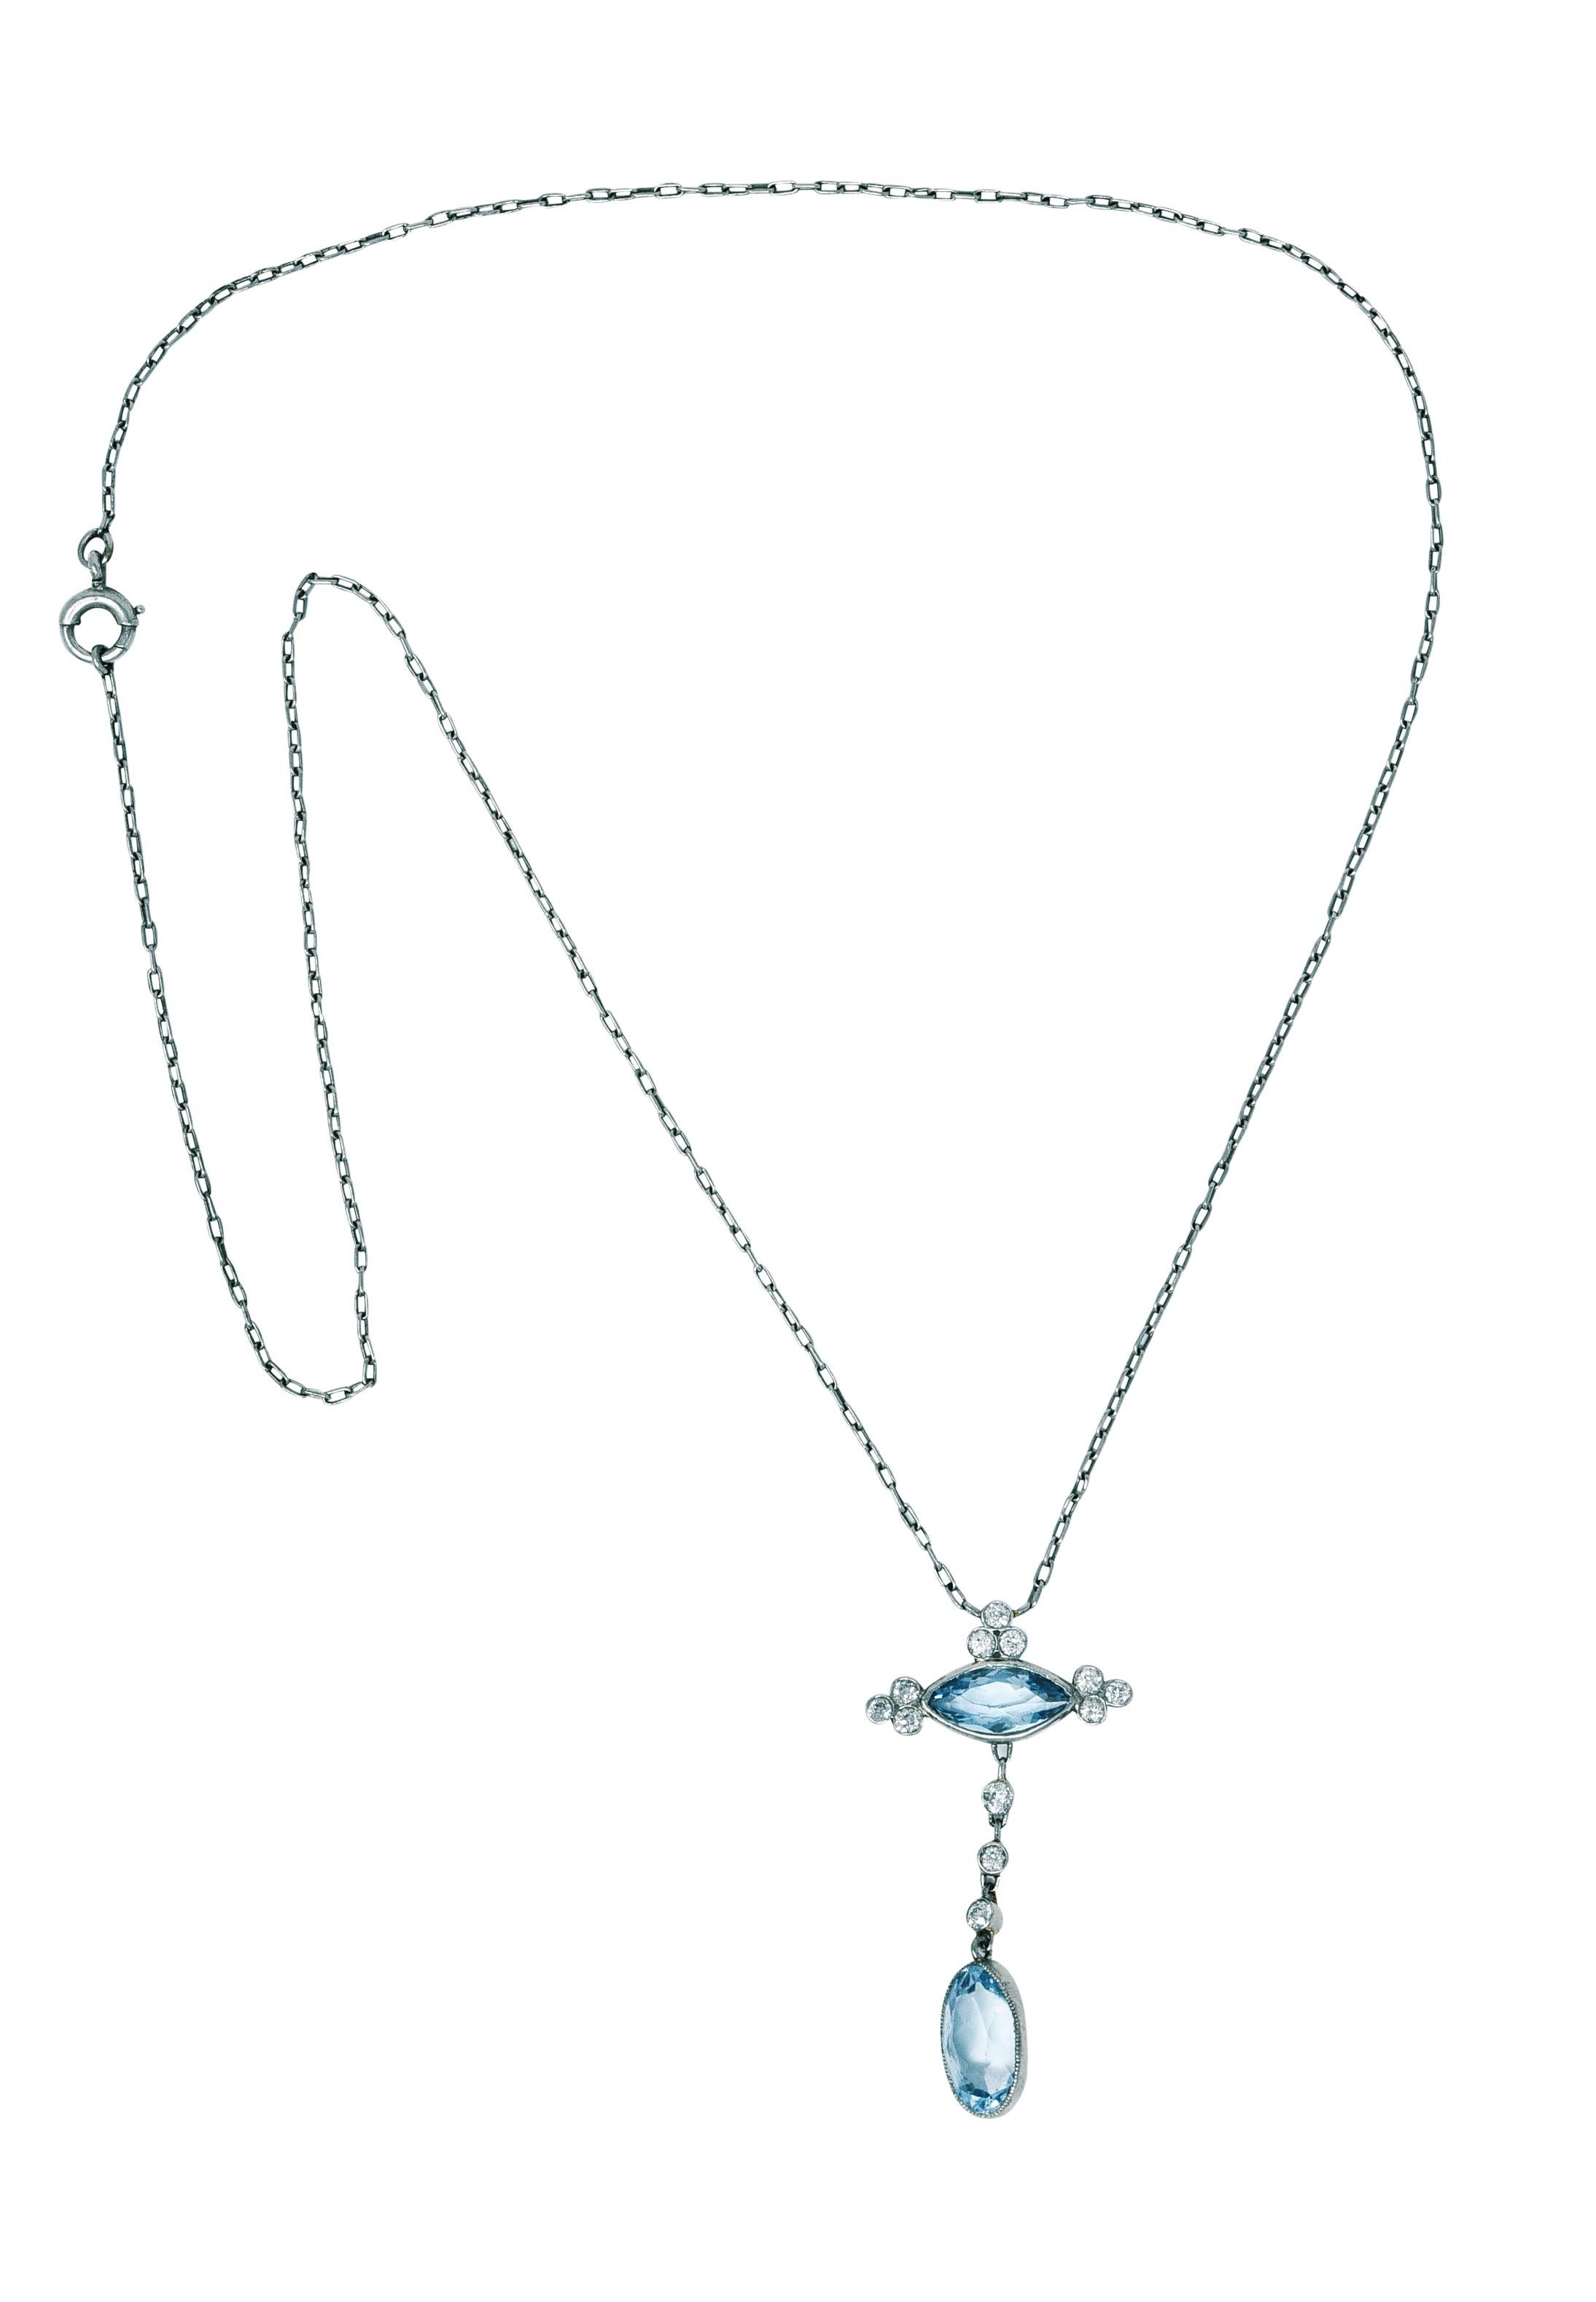 Delicately linked cable chain centers an articulated gemmed drop

Featuring a marquise and an oval cut aquamarine weighing in total approximately 2.40 carats

Bezel set and a well matched medium light greenish blue color

Accented by bezel set old